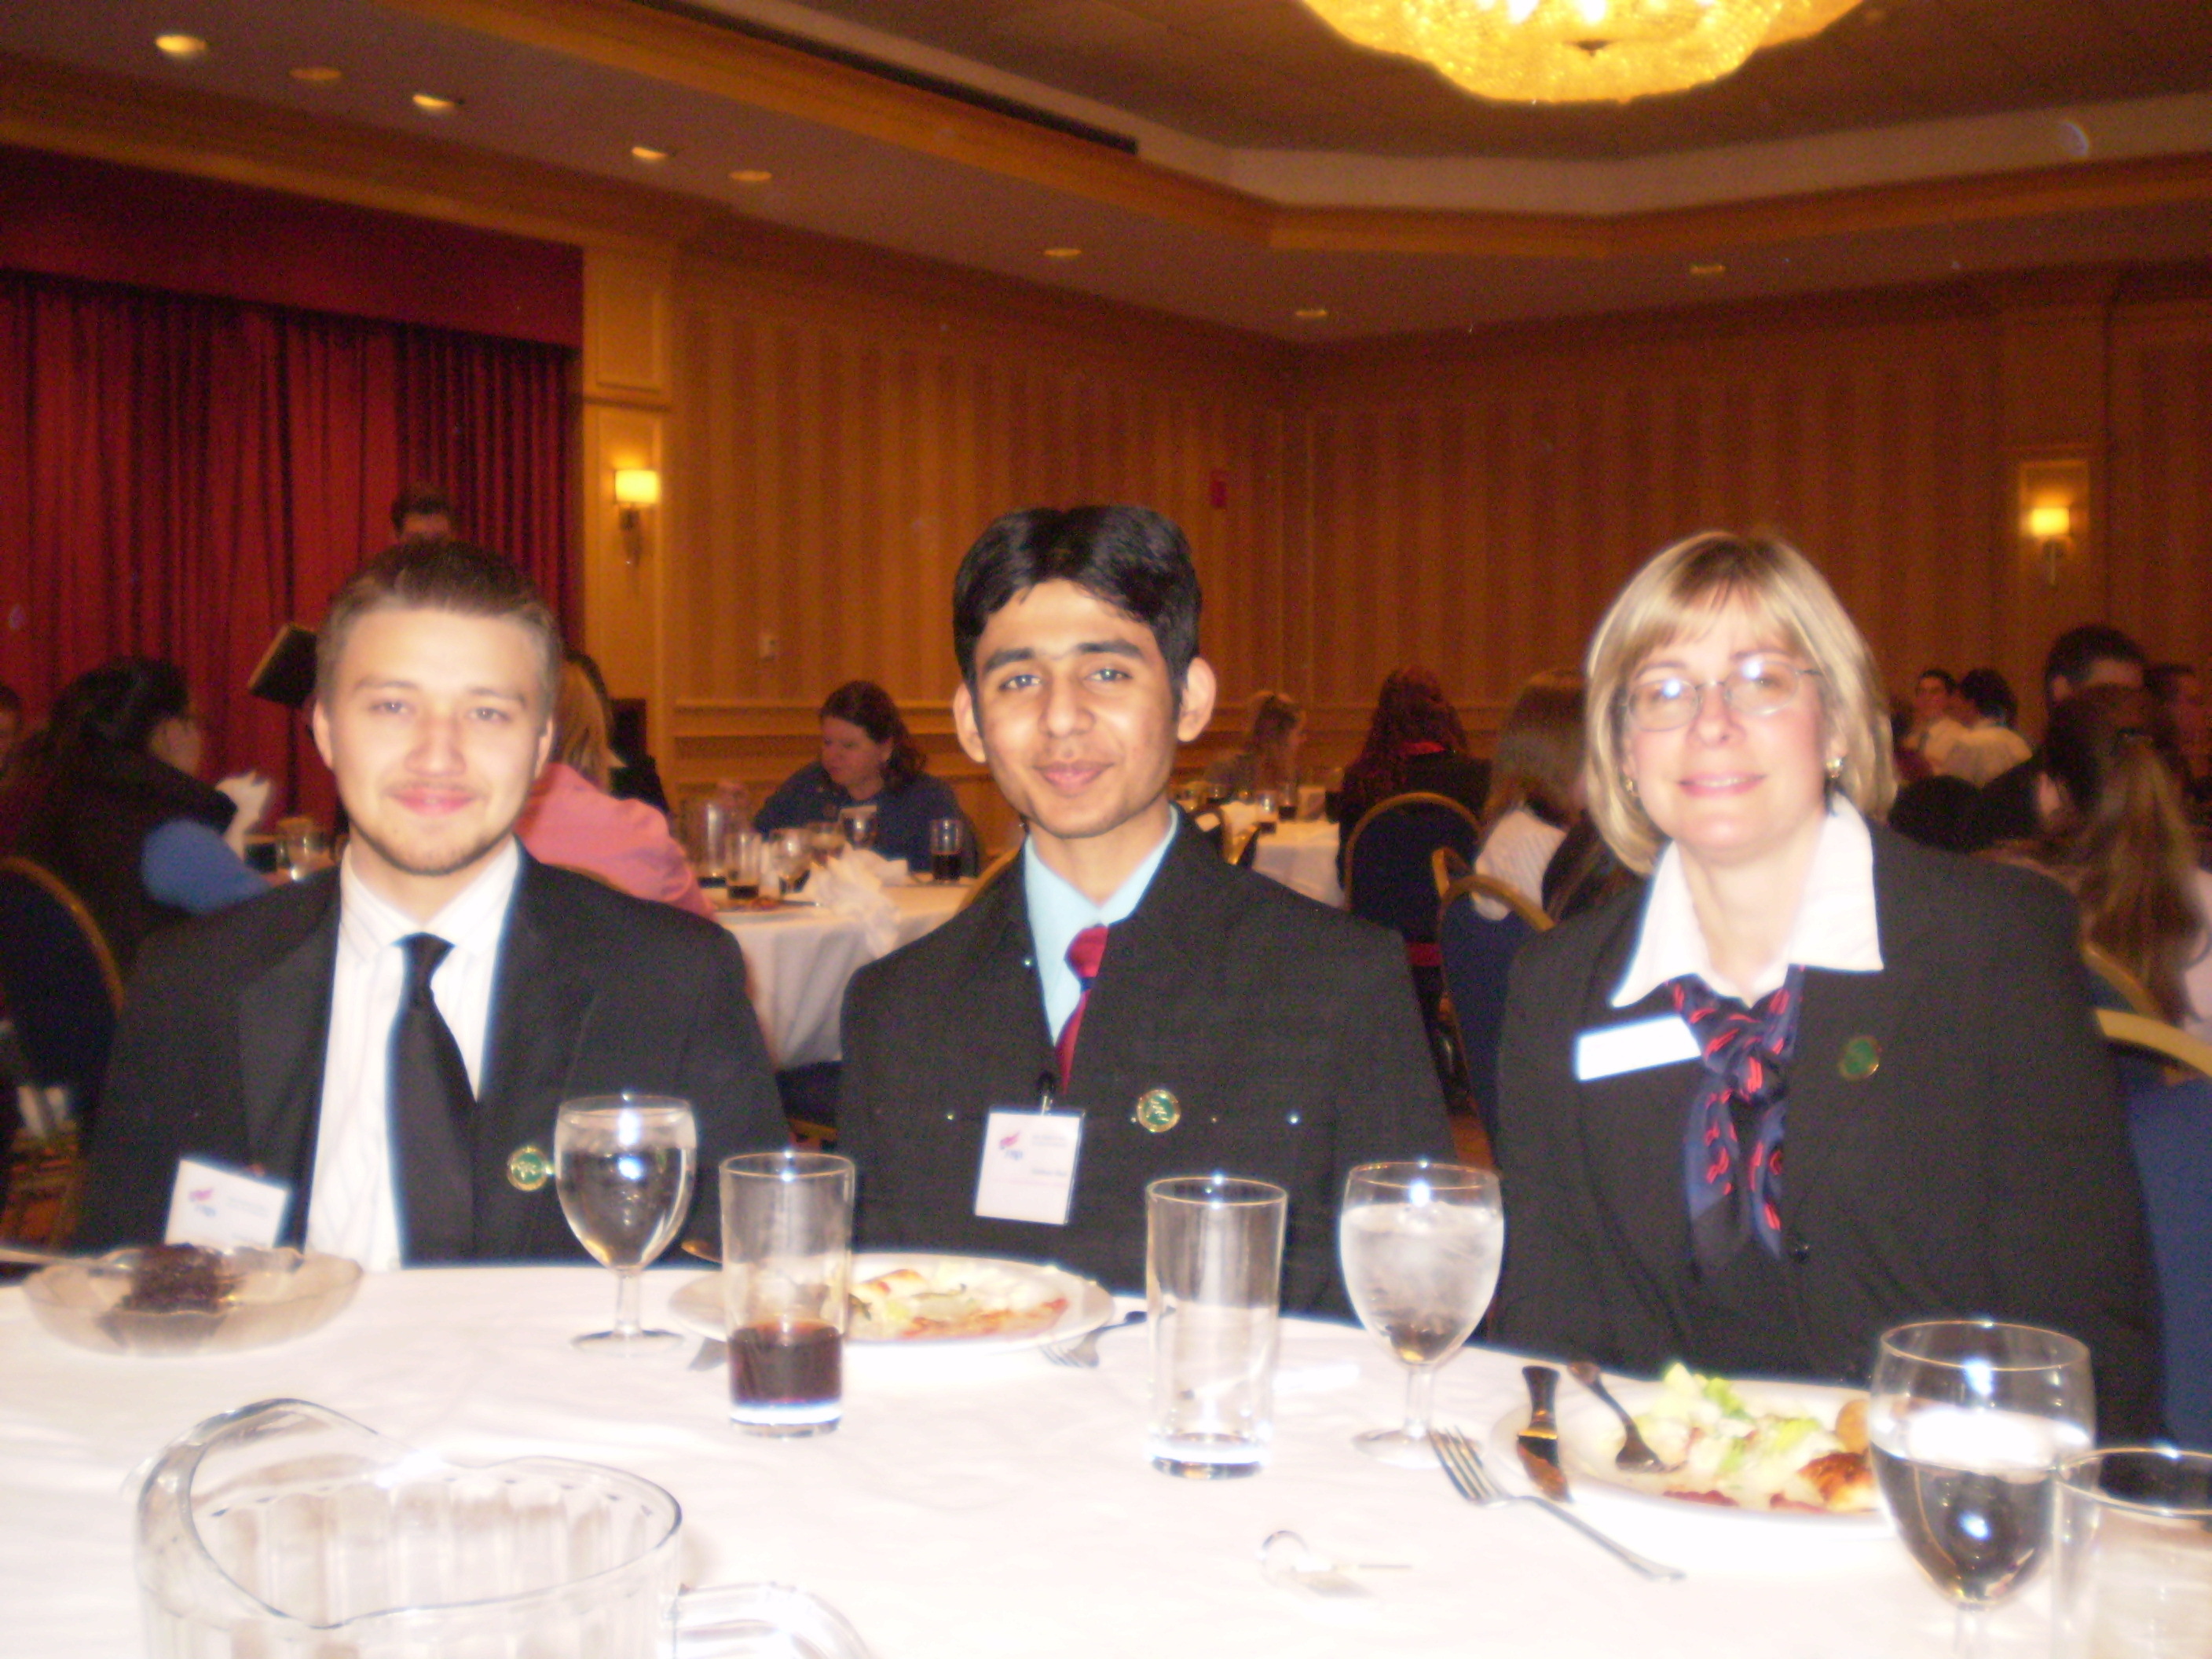 Alum Posing With Teacher And Fellow Student In Formal Wear At A Table